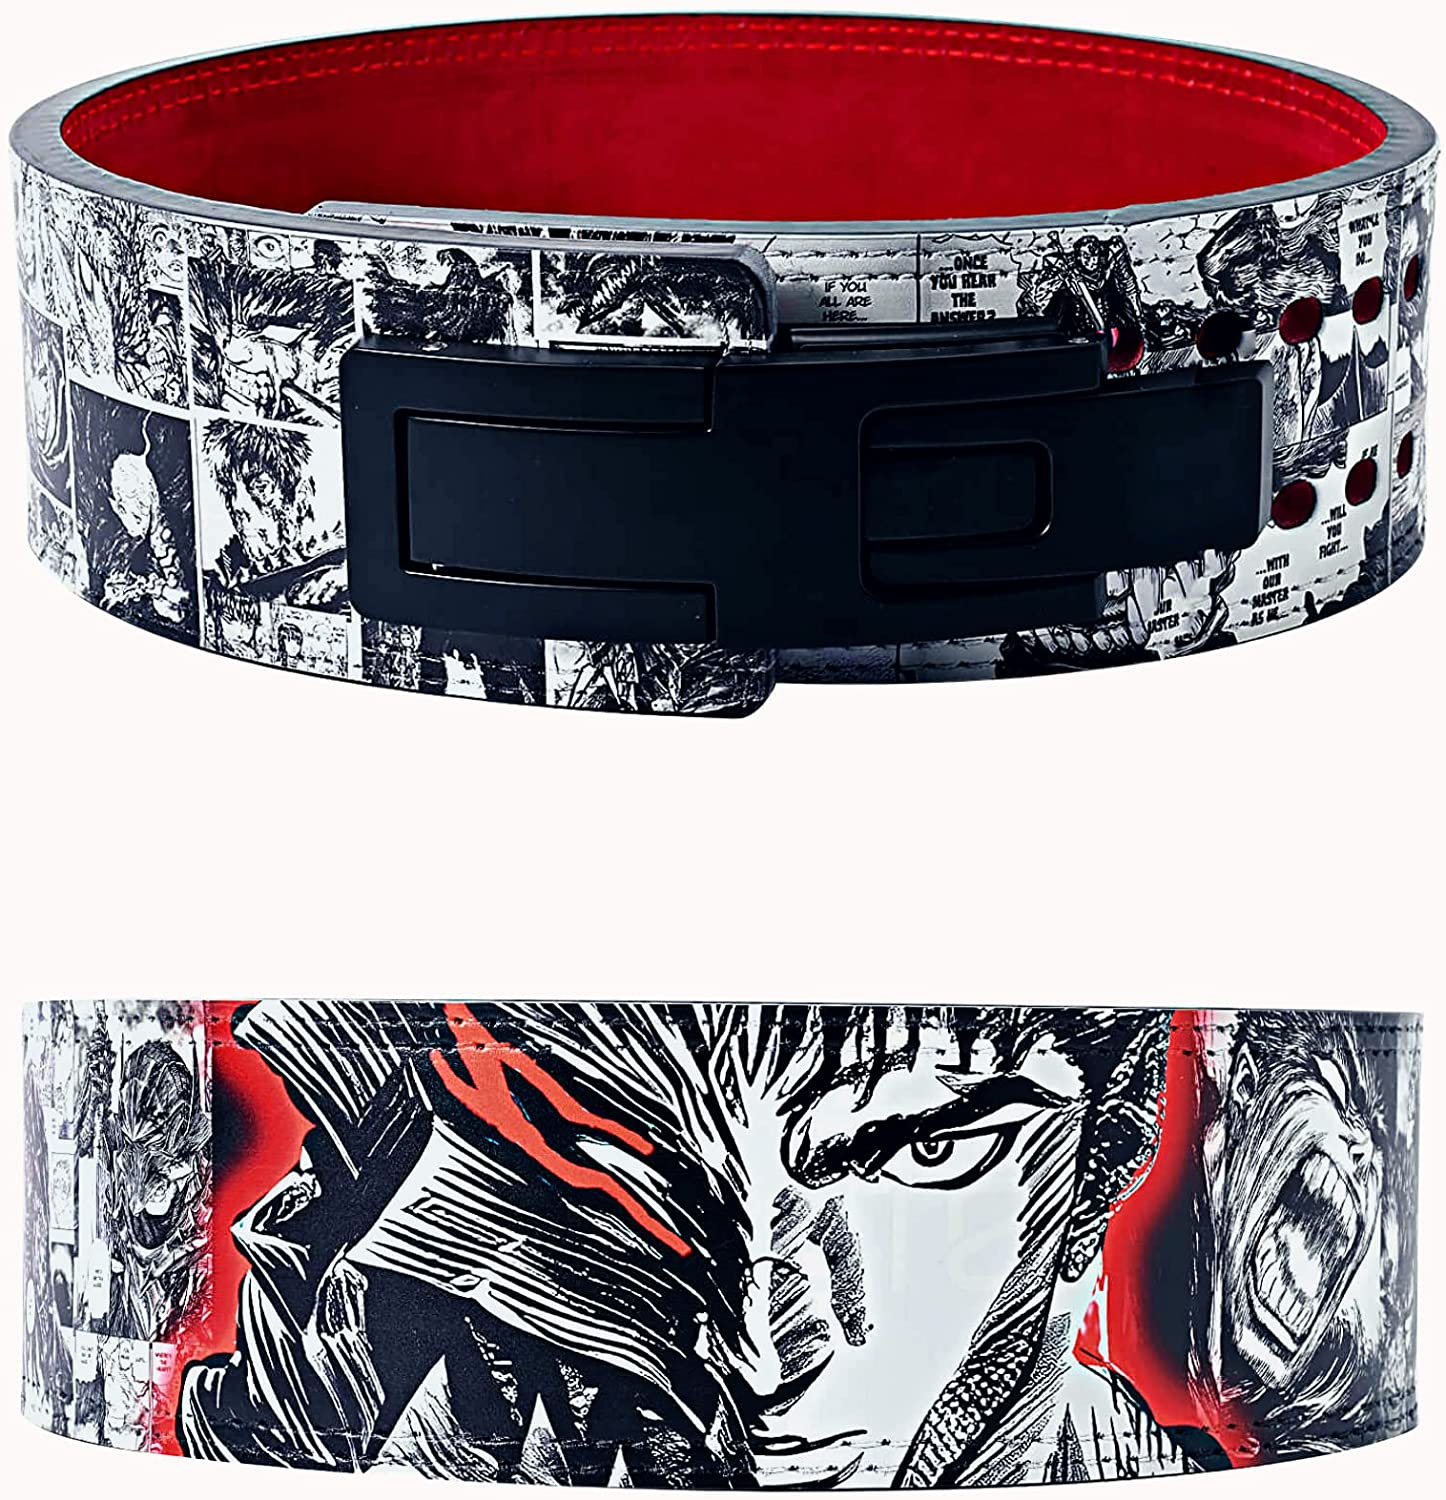 Shinichi Anime Chain Waist Belt Silver With Lip Clip And Hinged Ring Punk  Style Fake Piercing Jewelry Set 231101 From Yizhan02, $9.99 | DHgate.Com